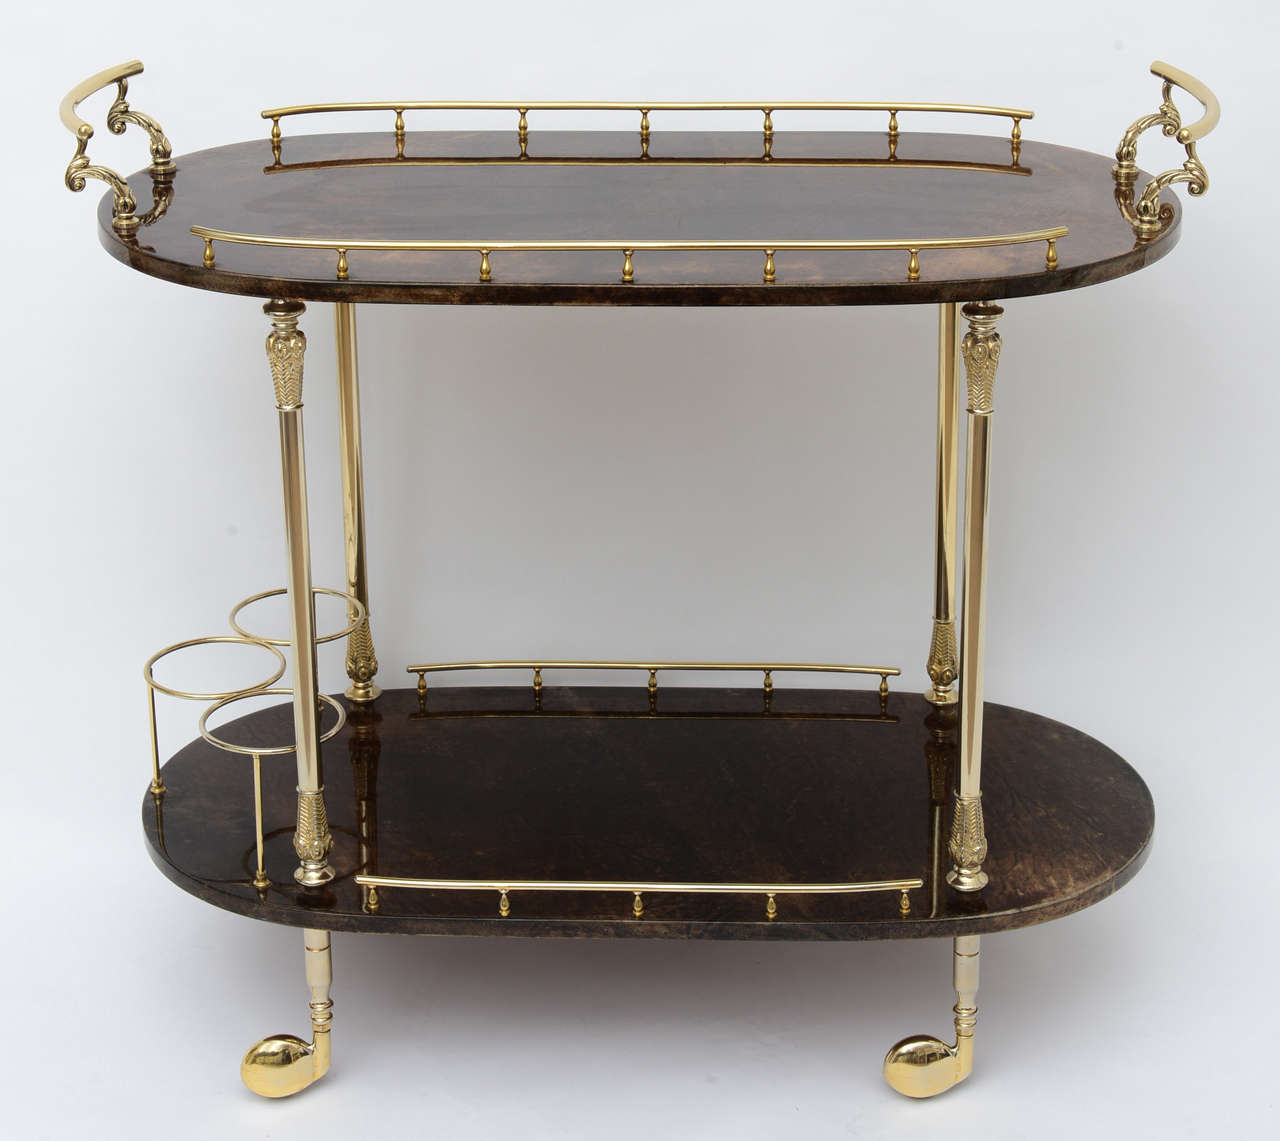 Stunning two tier bar cart wrapped in goatskin and covered with clear coat lacquer. The brass has been professionally polished and the golf club covered wheels roll perfectly. This piece is signed with the original Tura sticker.